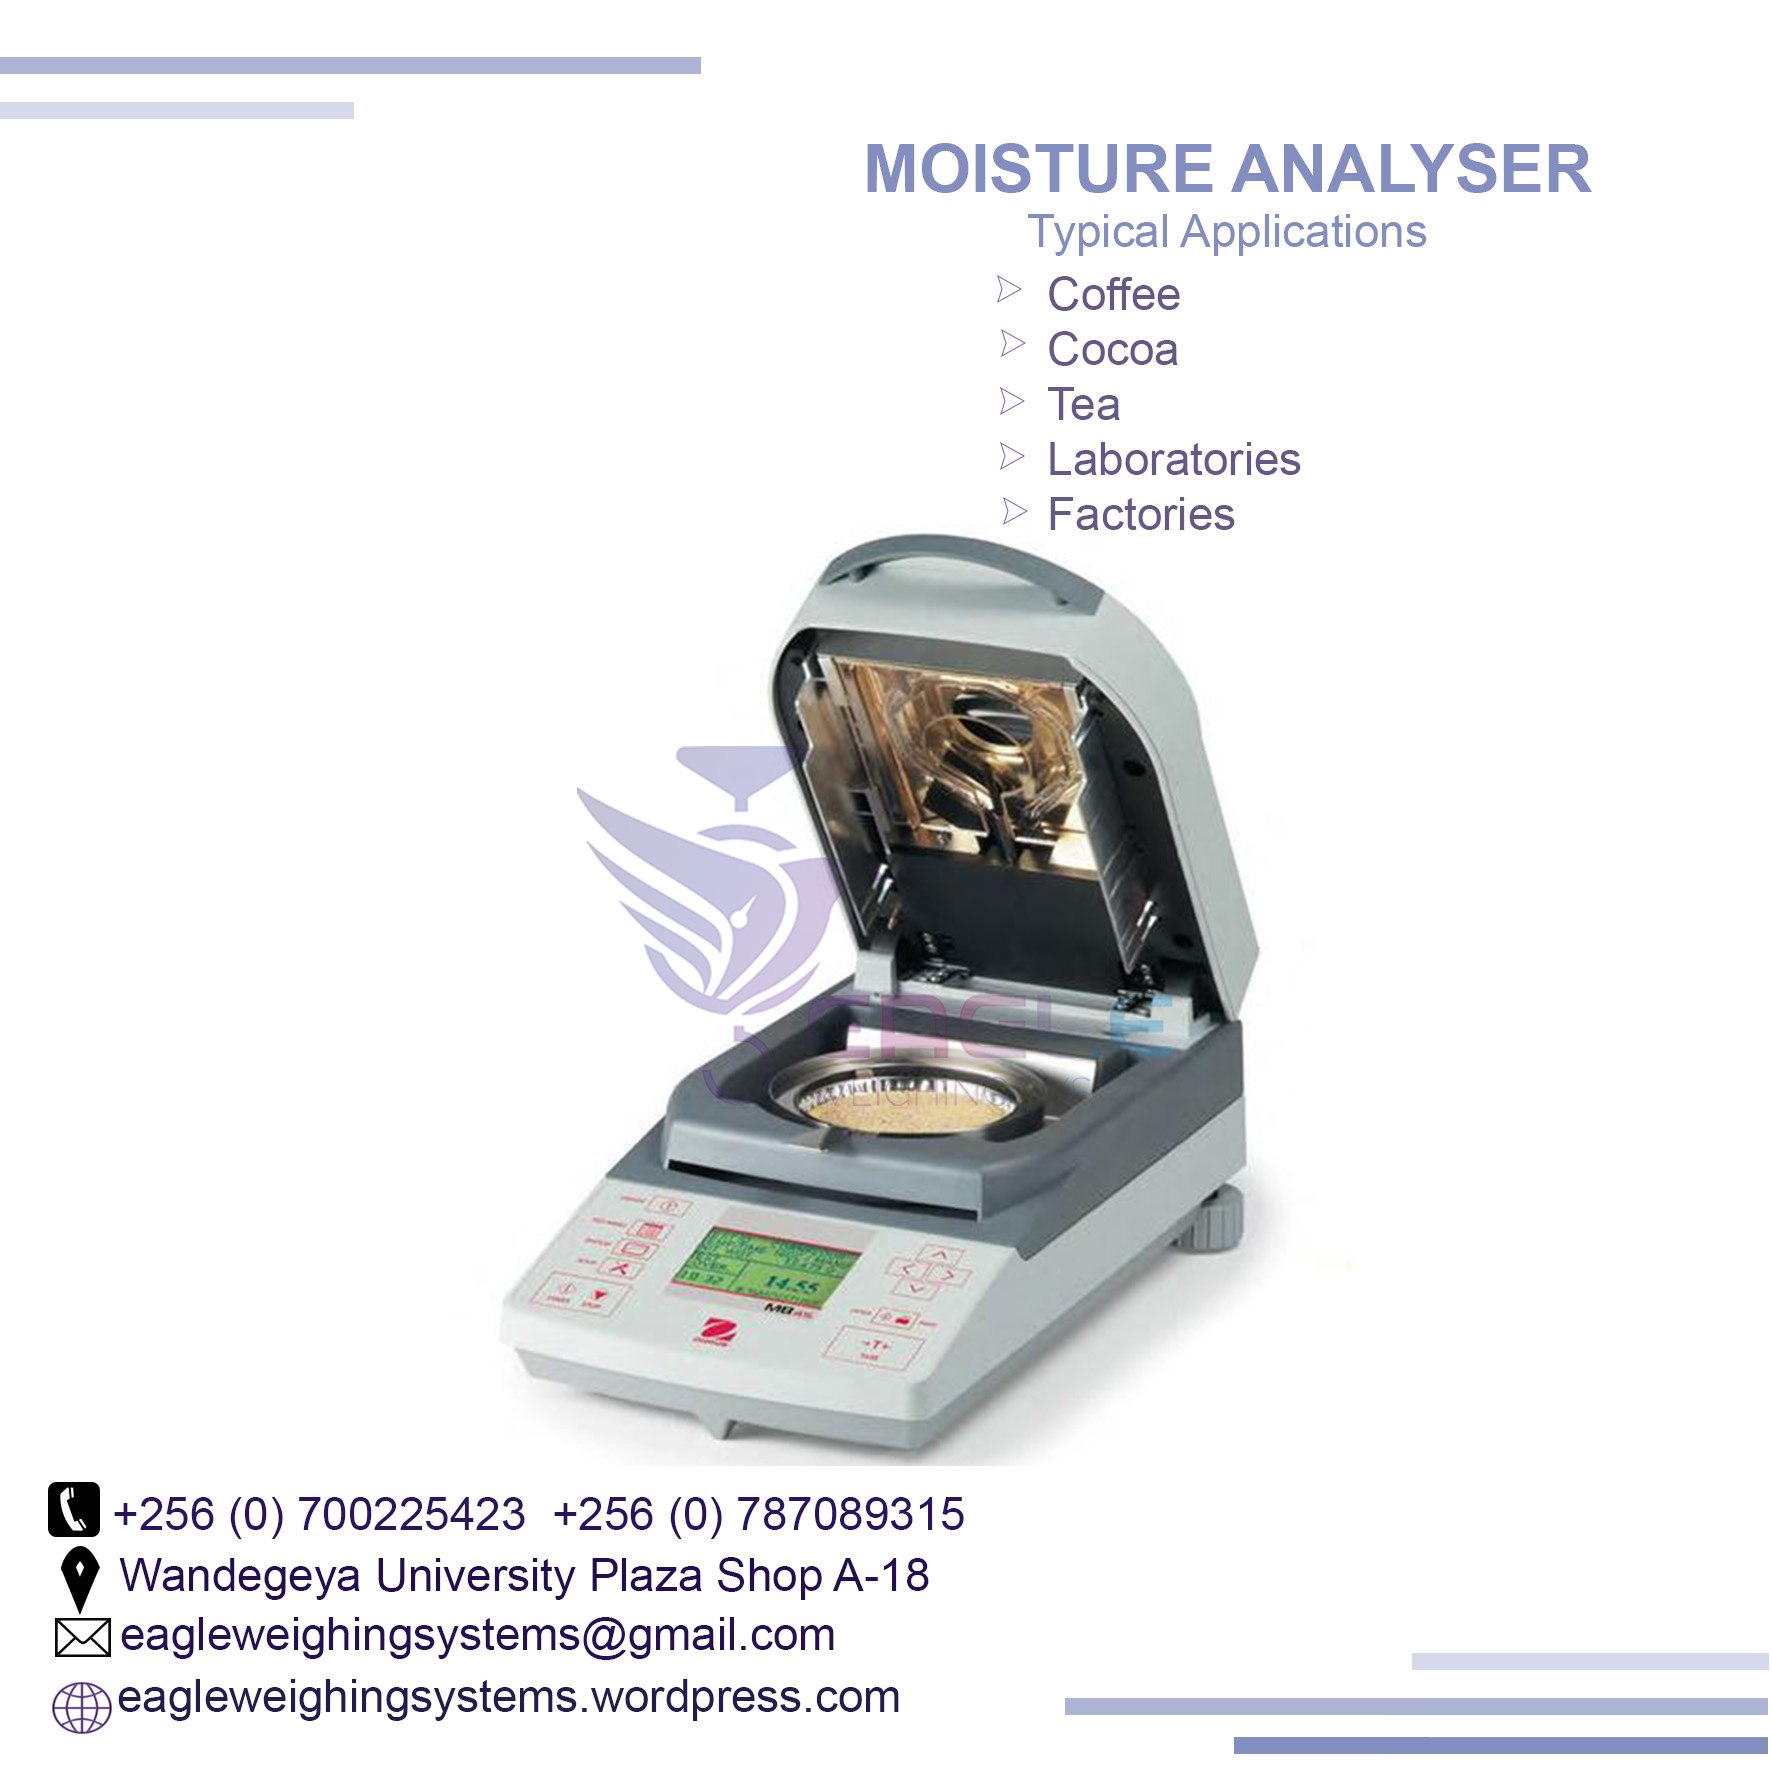 Touch screen halogen moisture analyzers in Uganda, Kampala Central Division, Central, Uganda